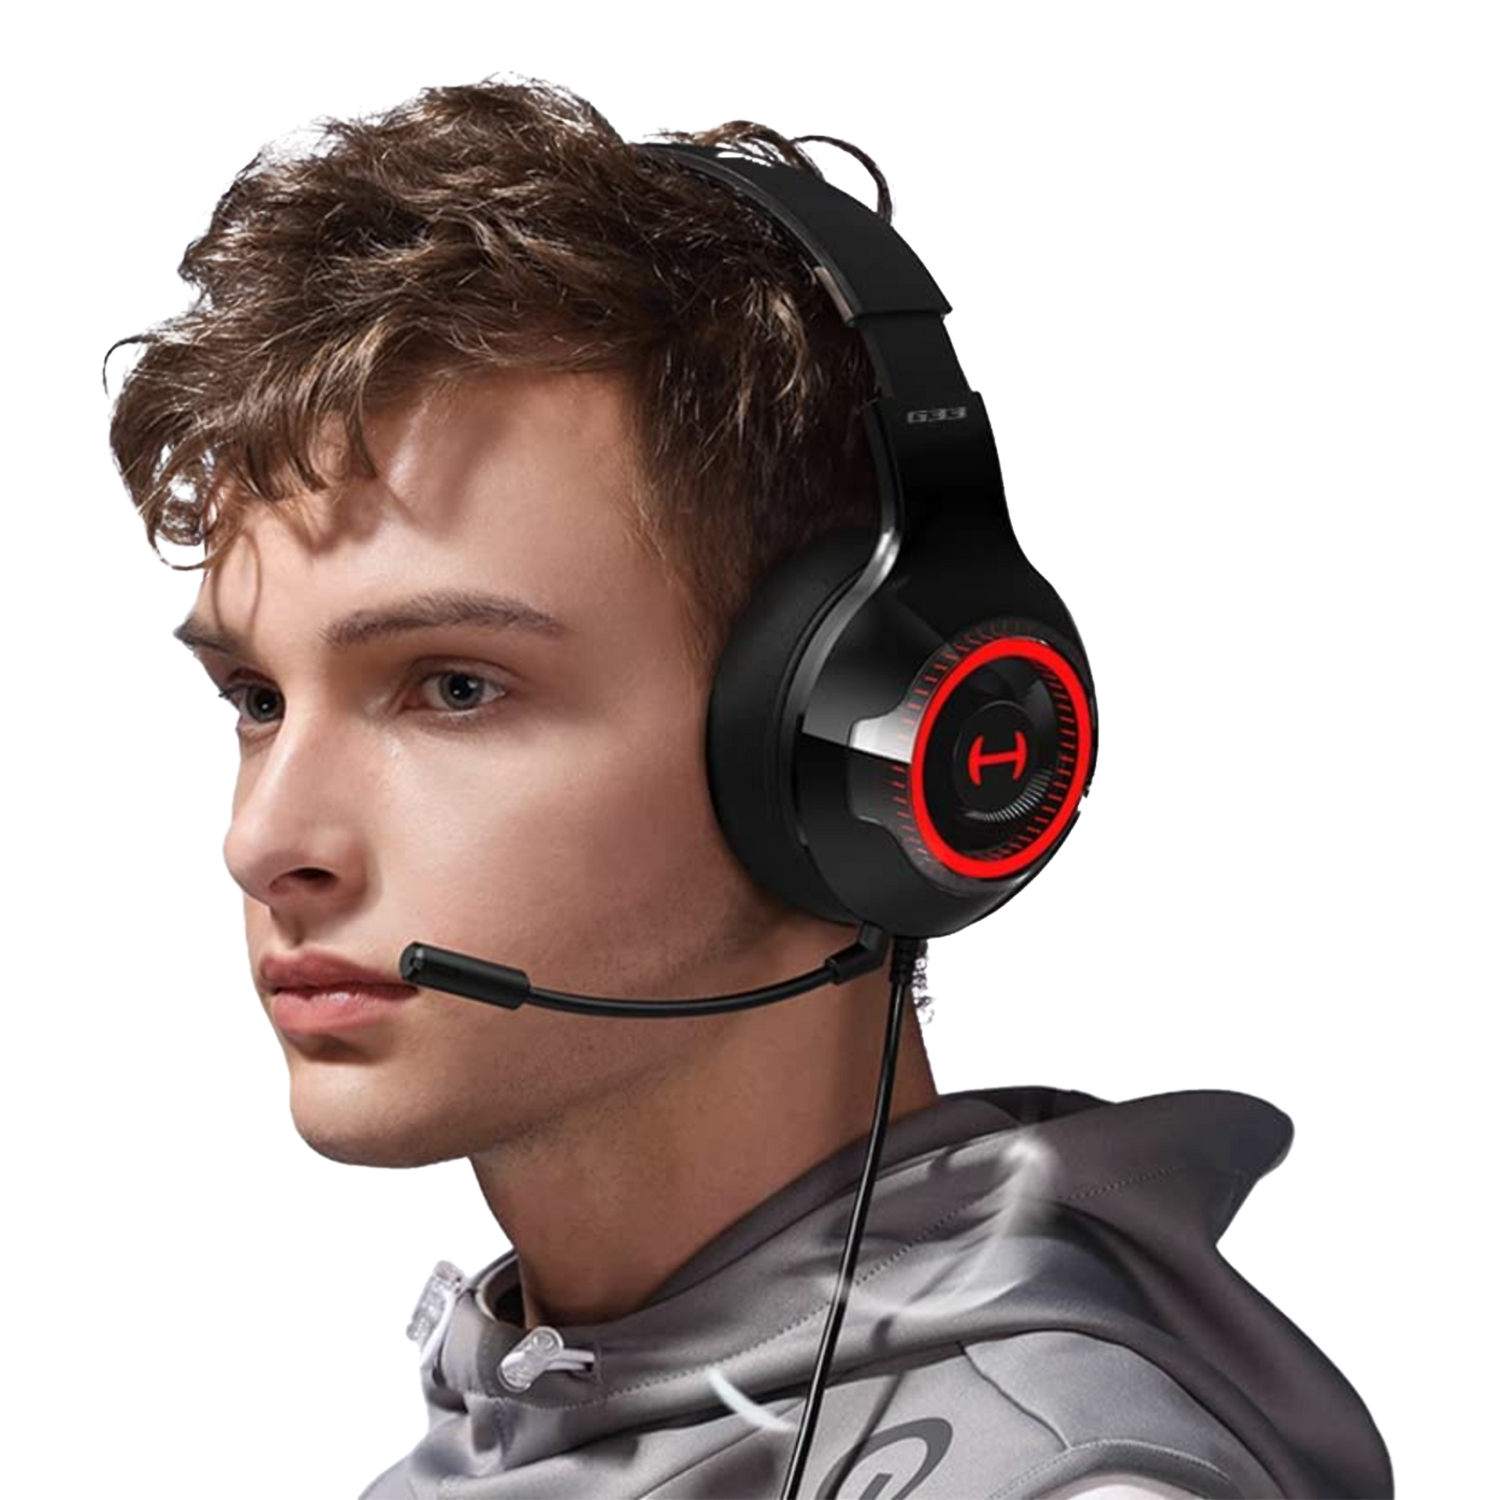 G33 Gaming Headset with Microphone